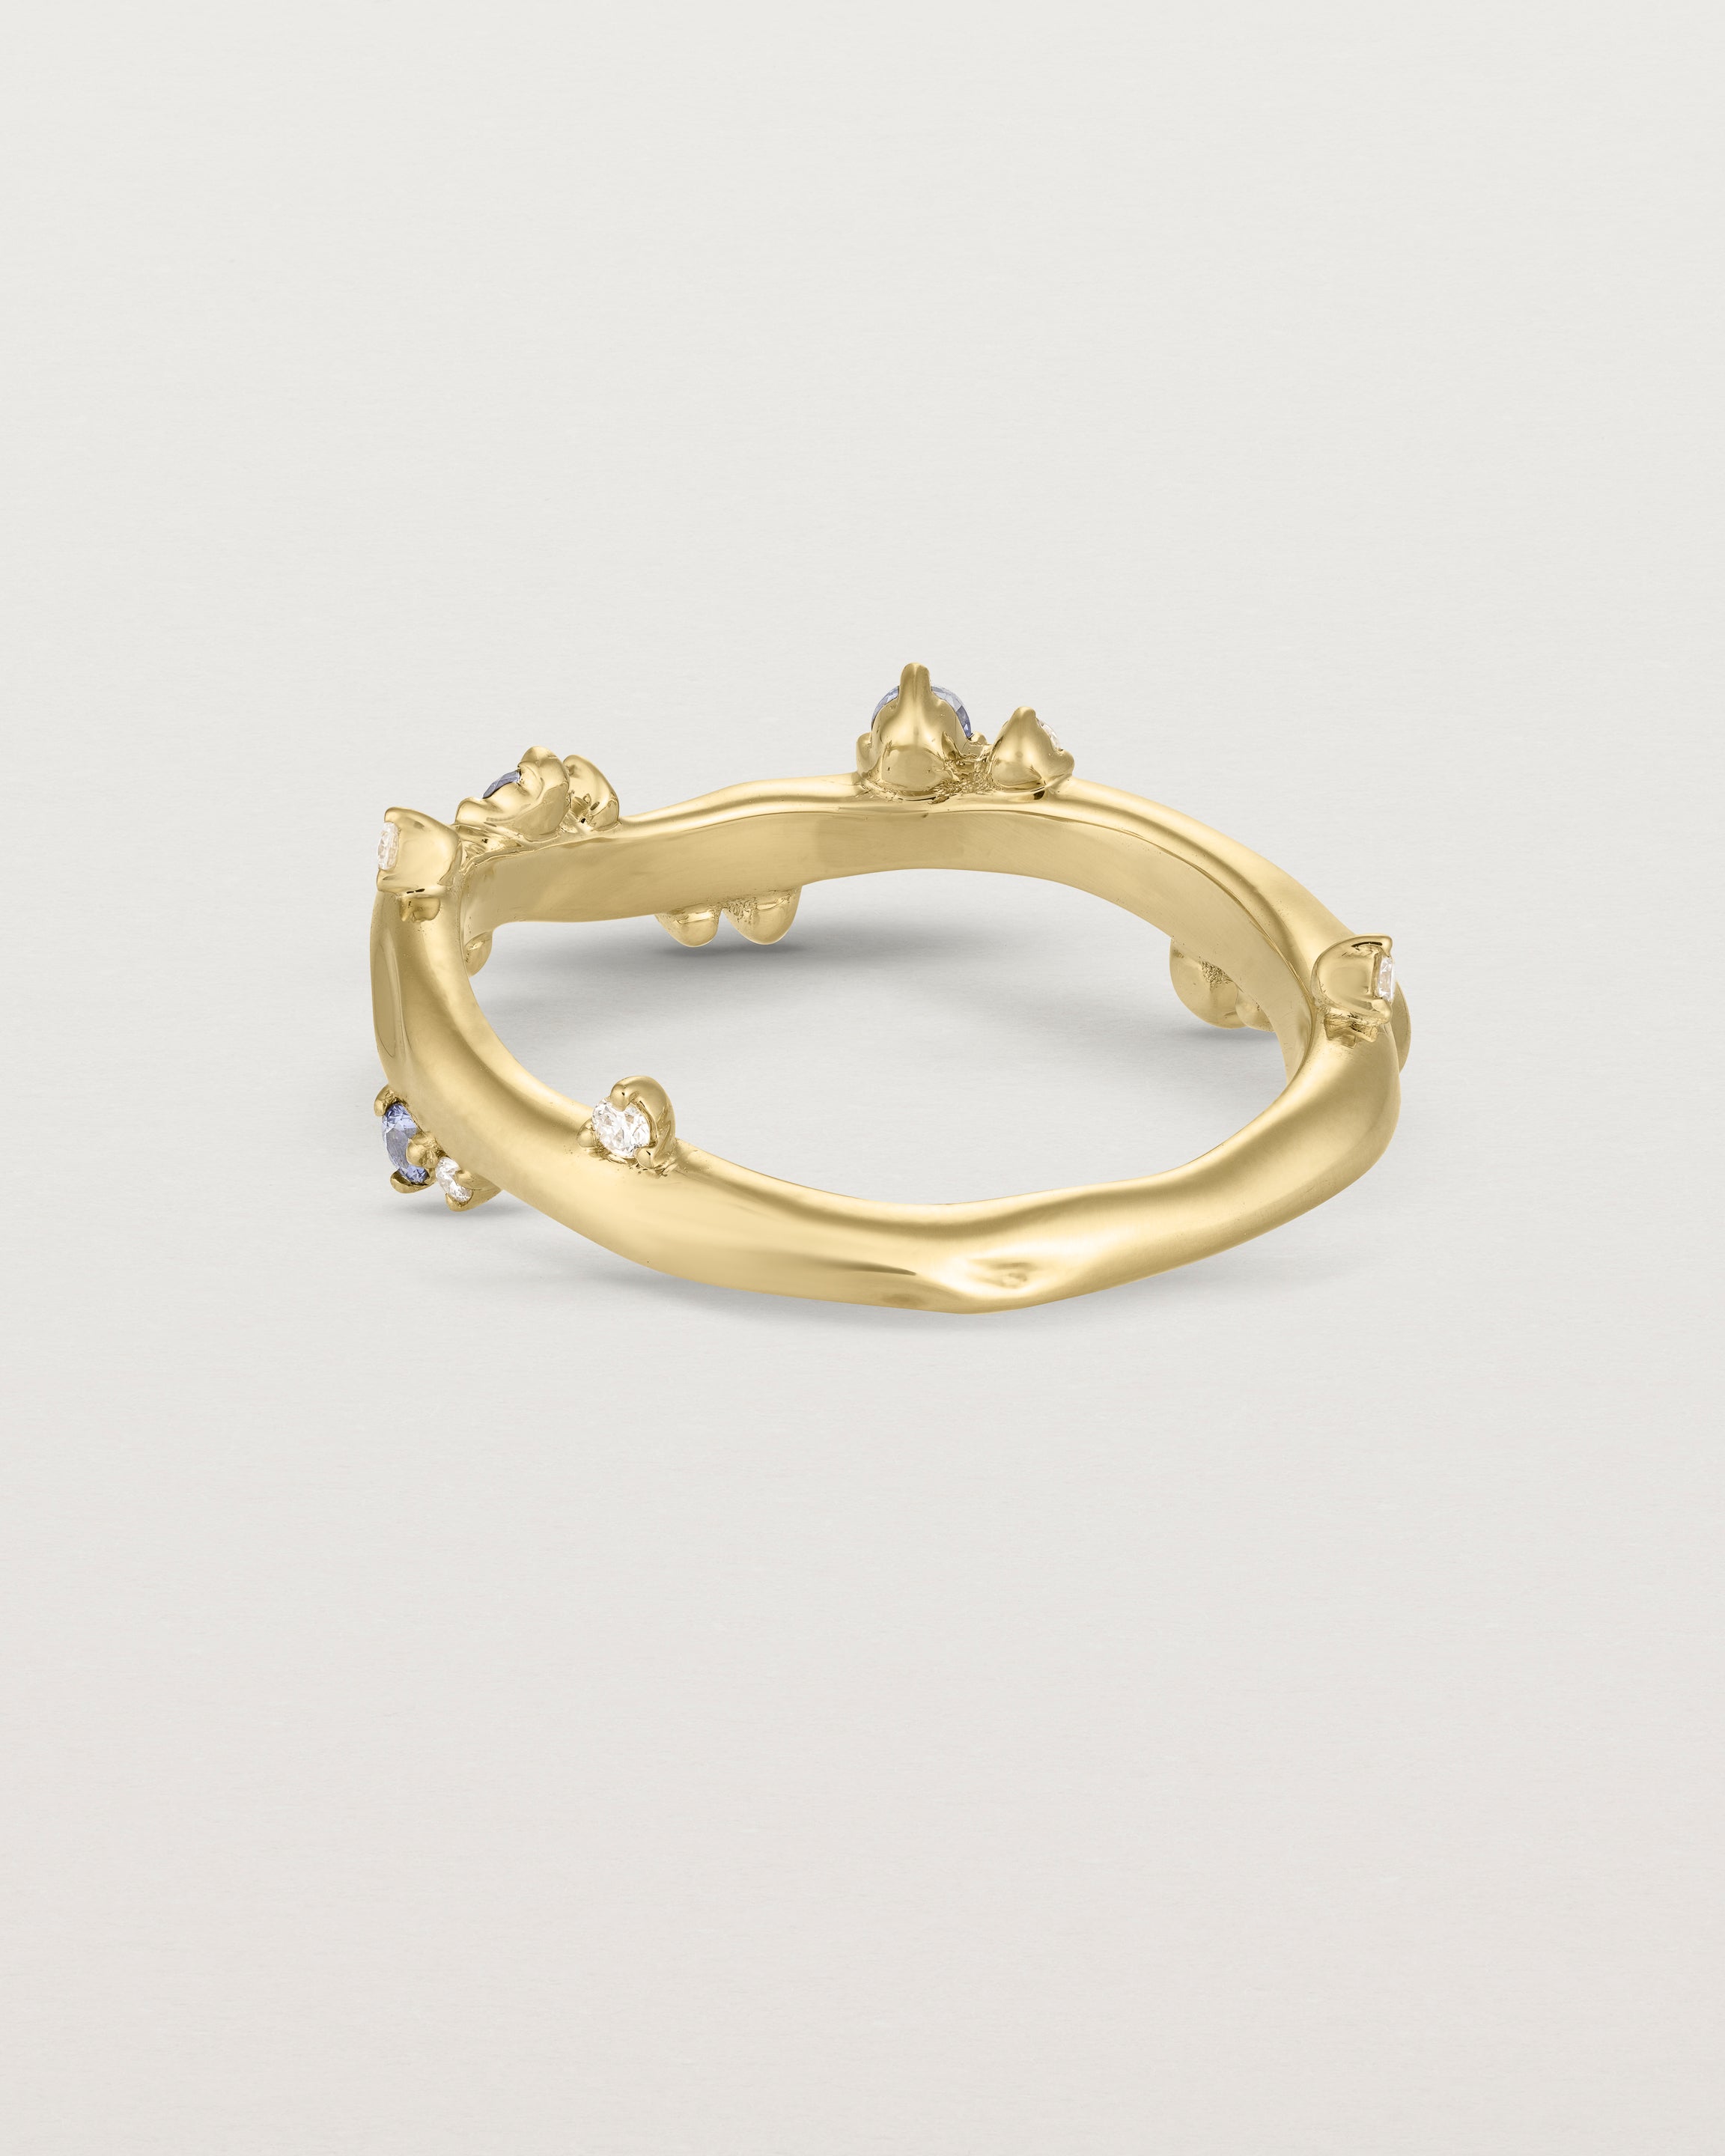 back image of the Ember ring in yellow gold featuring a scattering of white diamonds and blue sapphires.